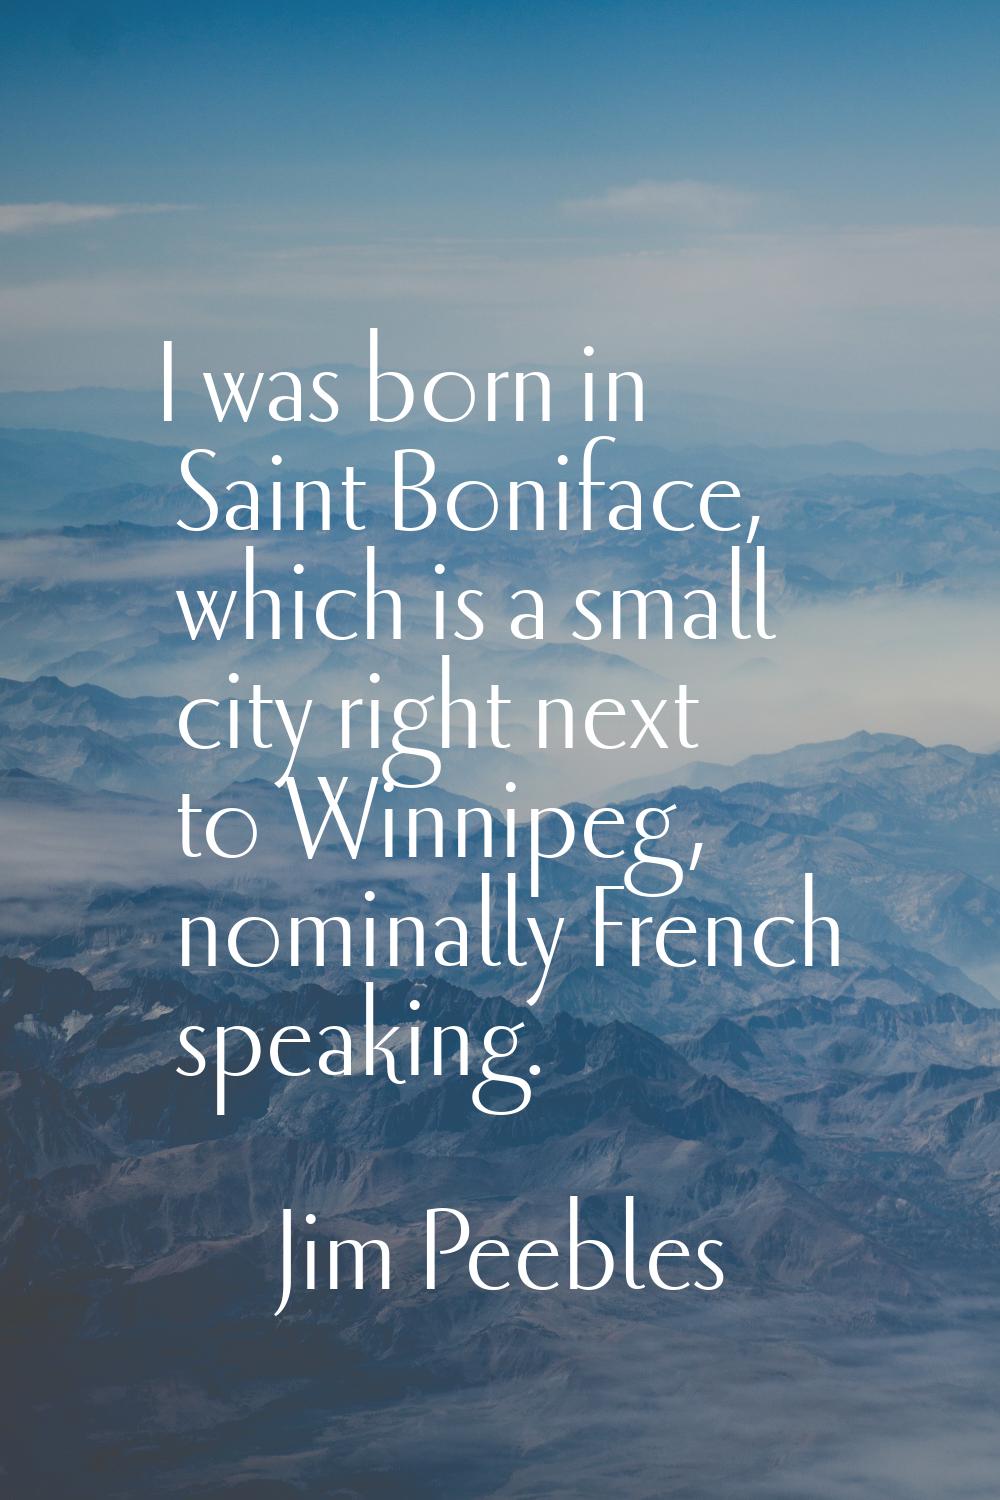 I was born in Saint Boniface, which is a small city right next to Winnipeg, nominally French speaki